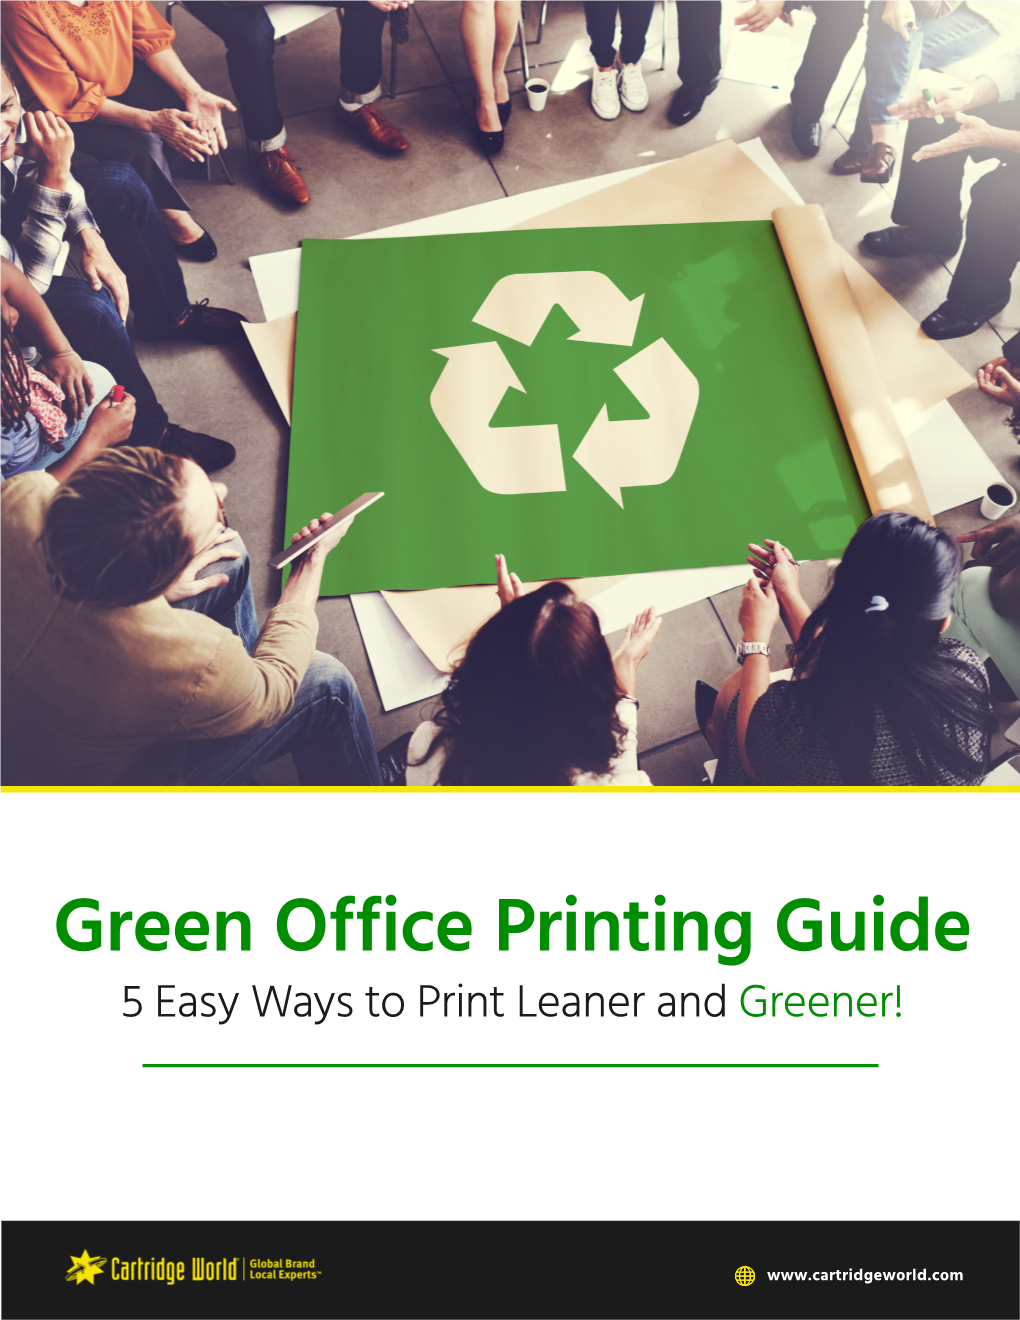 Green Office Printing Guide 5 Easy Ways to Print Leaner and Greener!